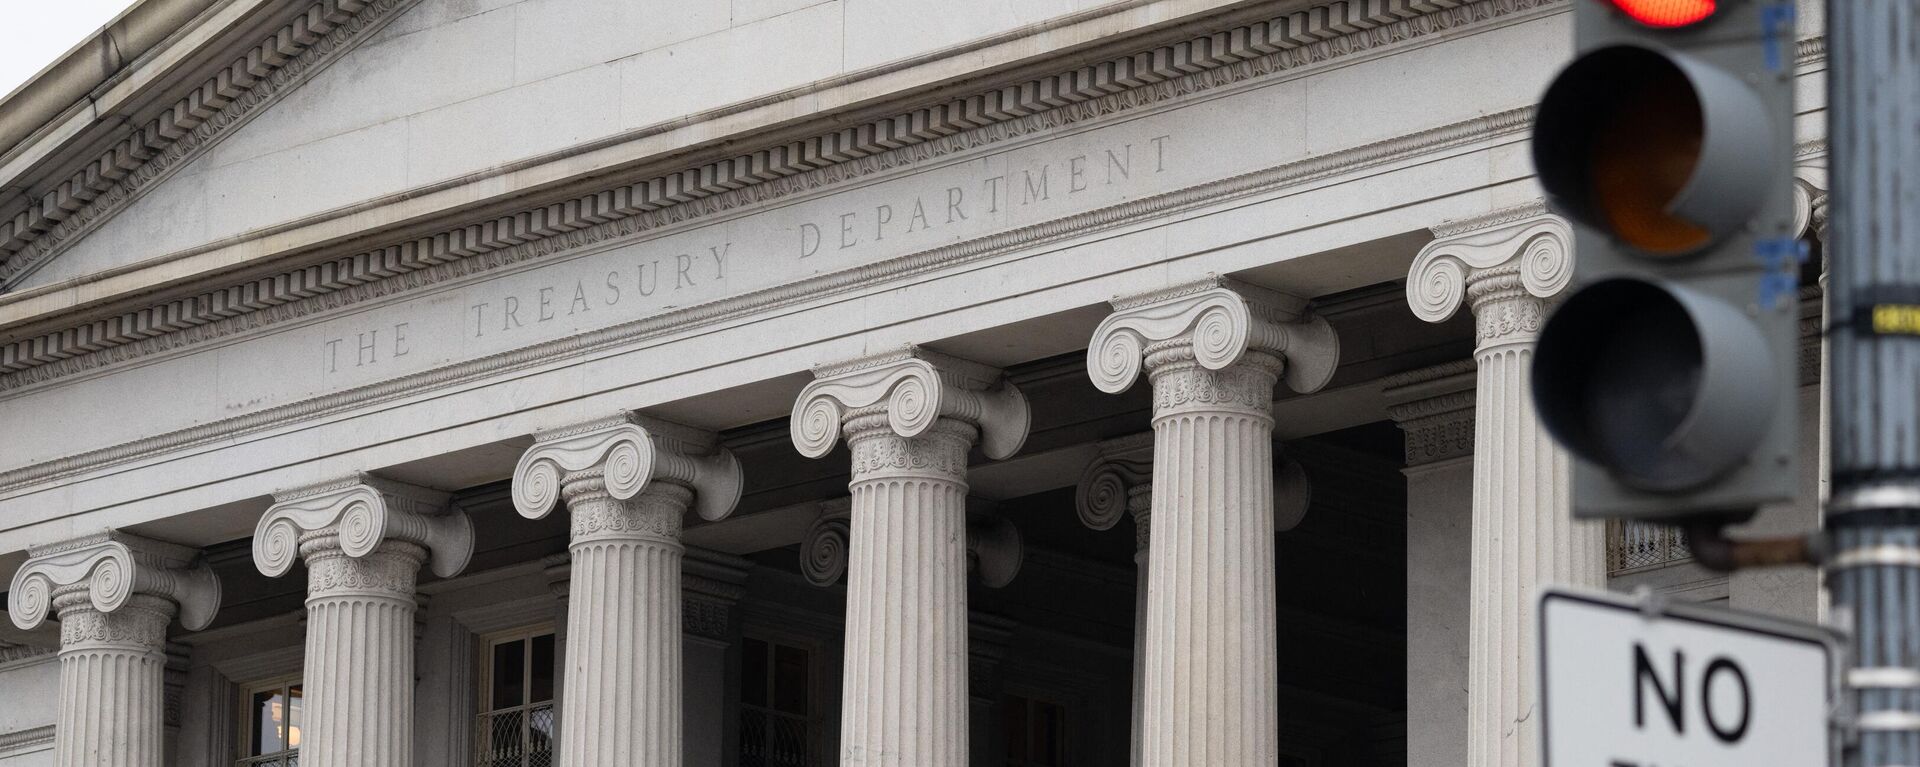 The US Treasury Department building is seen in Washington, DC, January 19, 2023, following an announcement by the US Treasury that it had begun taking measures Thursday to prevent a default on government debt, as Congress heads towards a high-stakes clash between Democrats and Republicans over raising the borrowing limit - Sputnik International, 1920, 04.06.2023